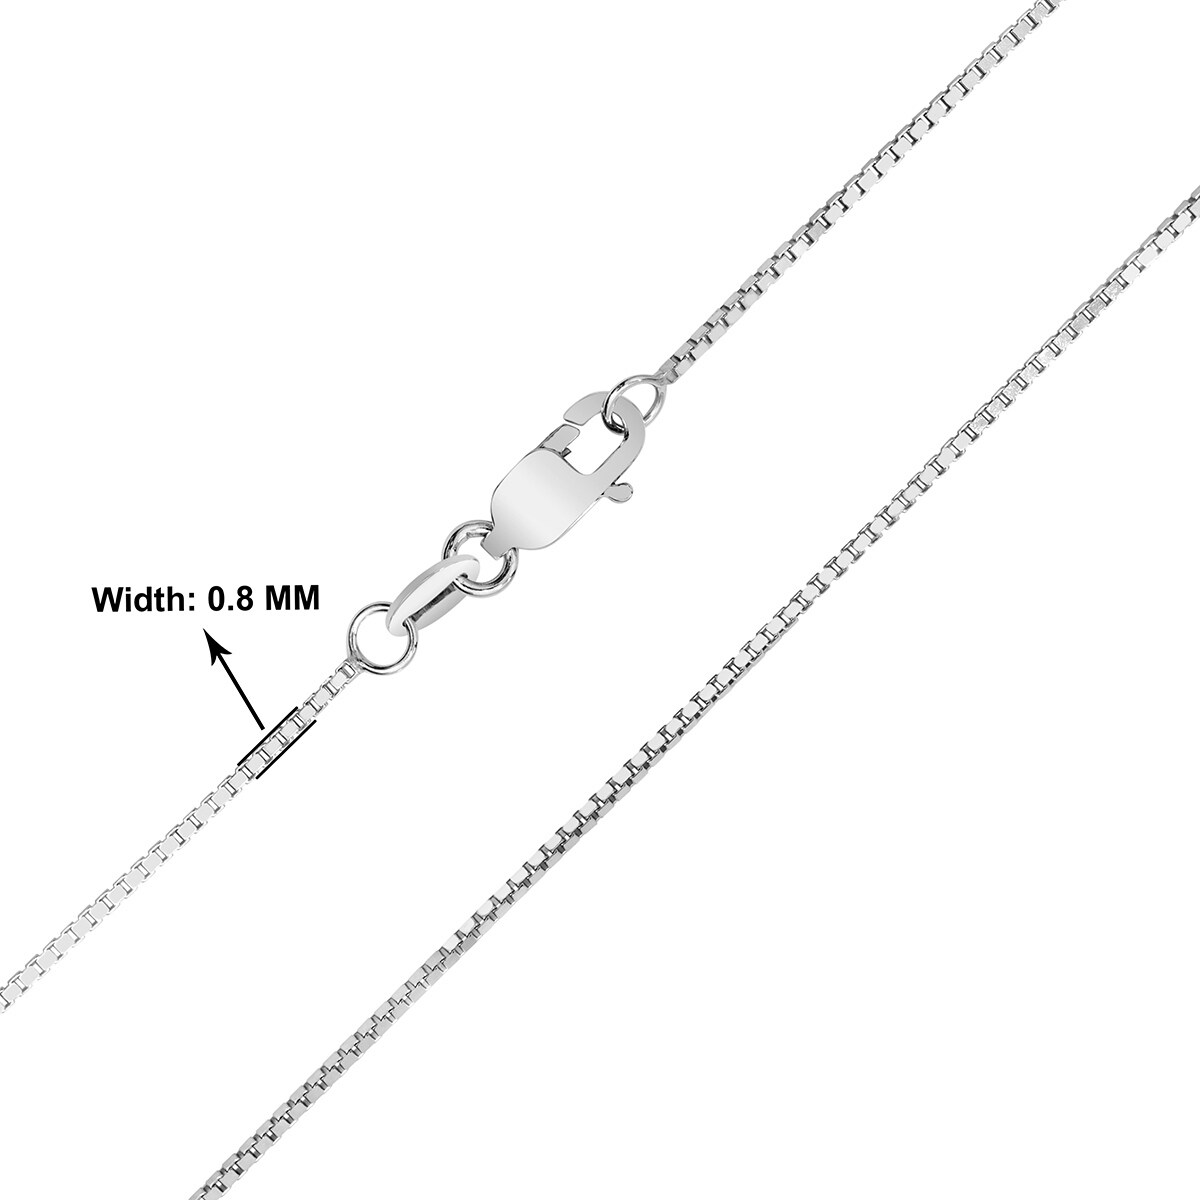 with Secure Lobster Lock Clasp Jewel Tie 14K White Gold .9 mm Diamond-Cut Twisted Box Chain Necklace